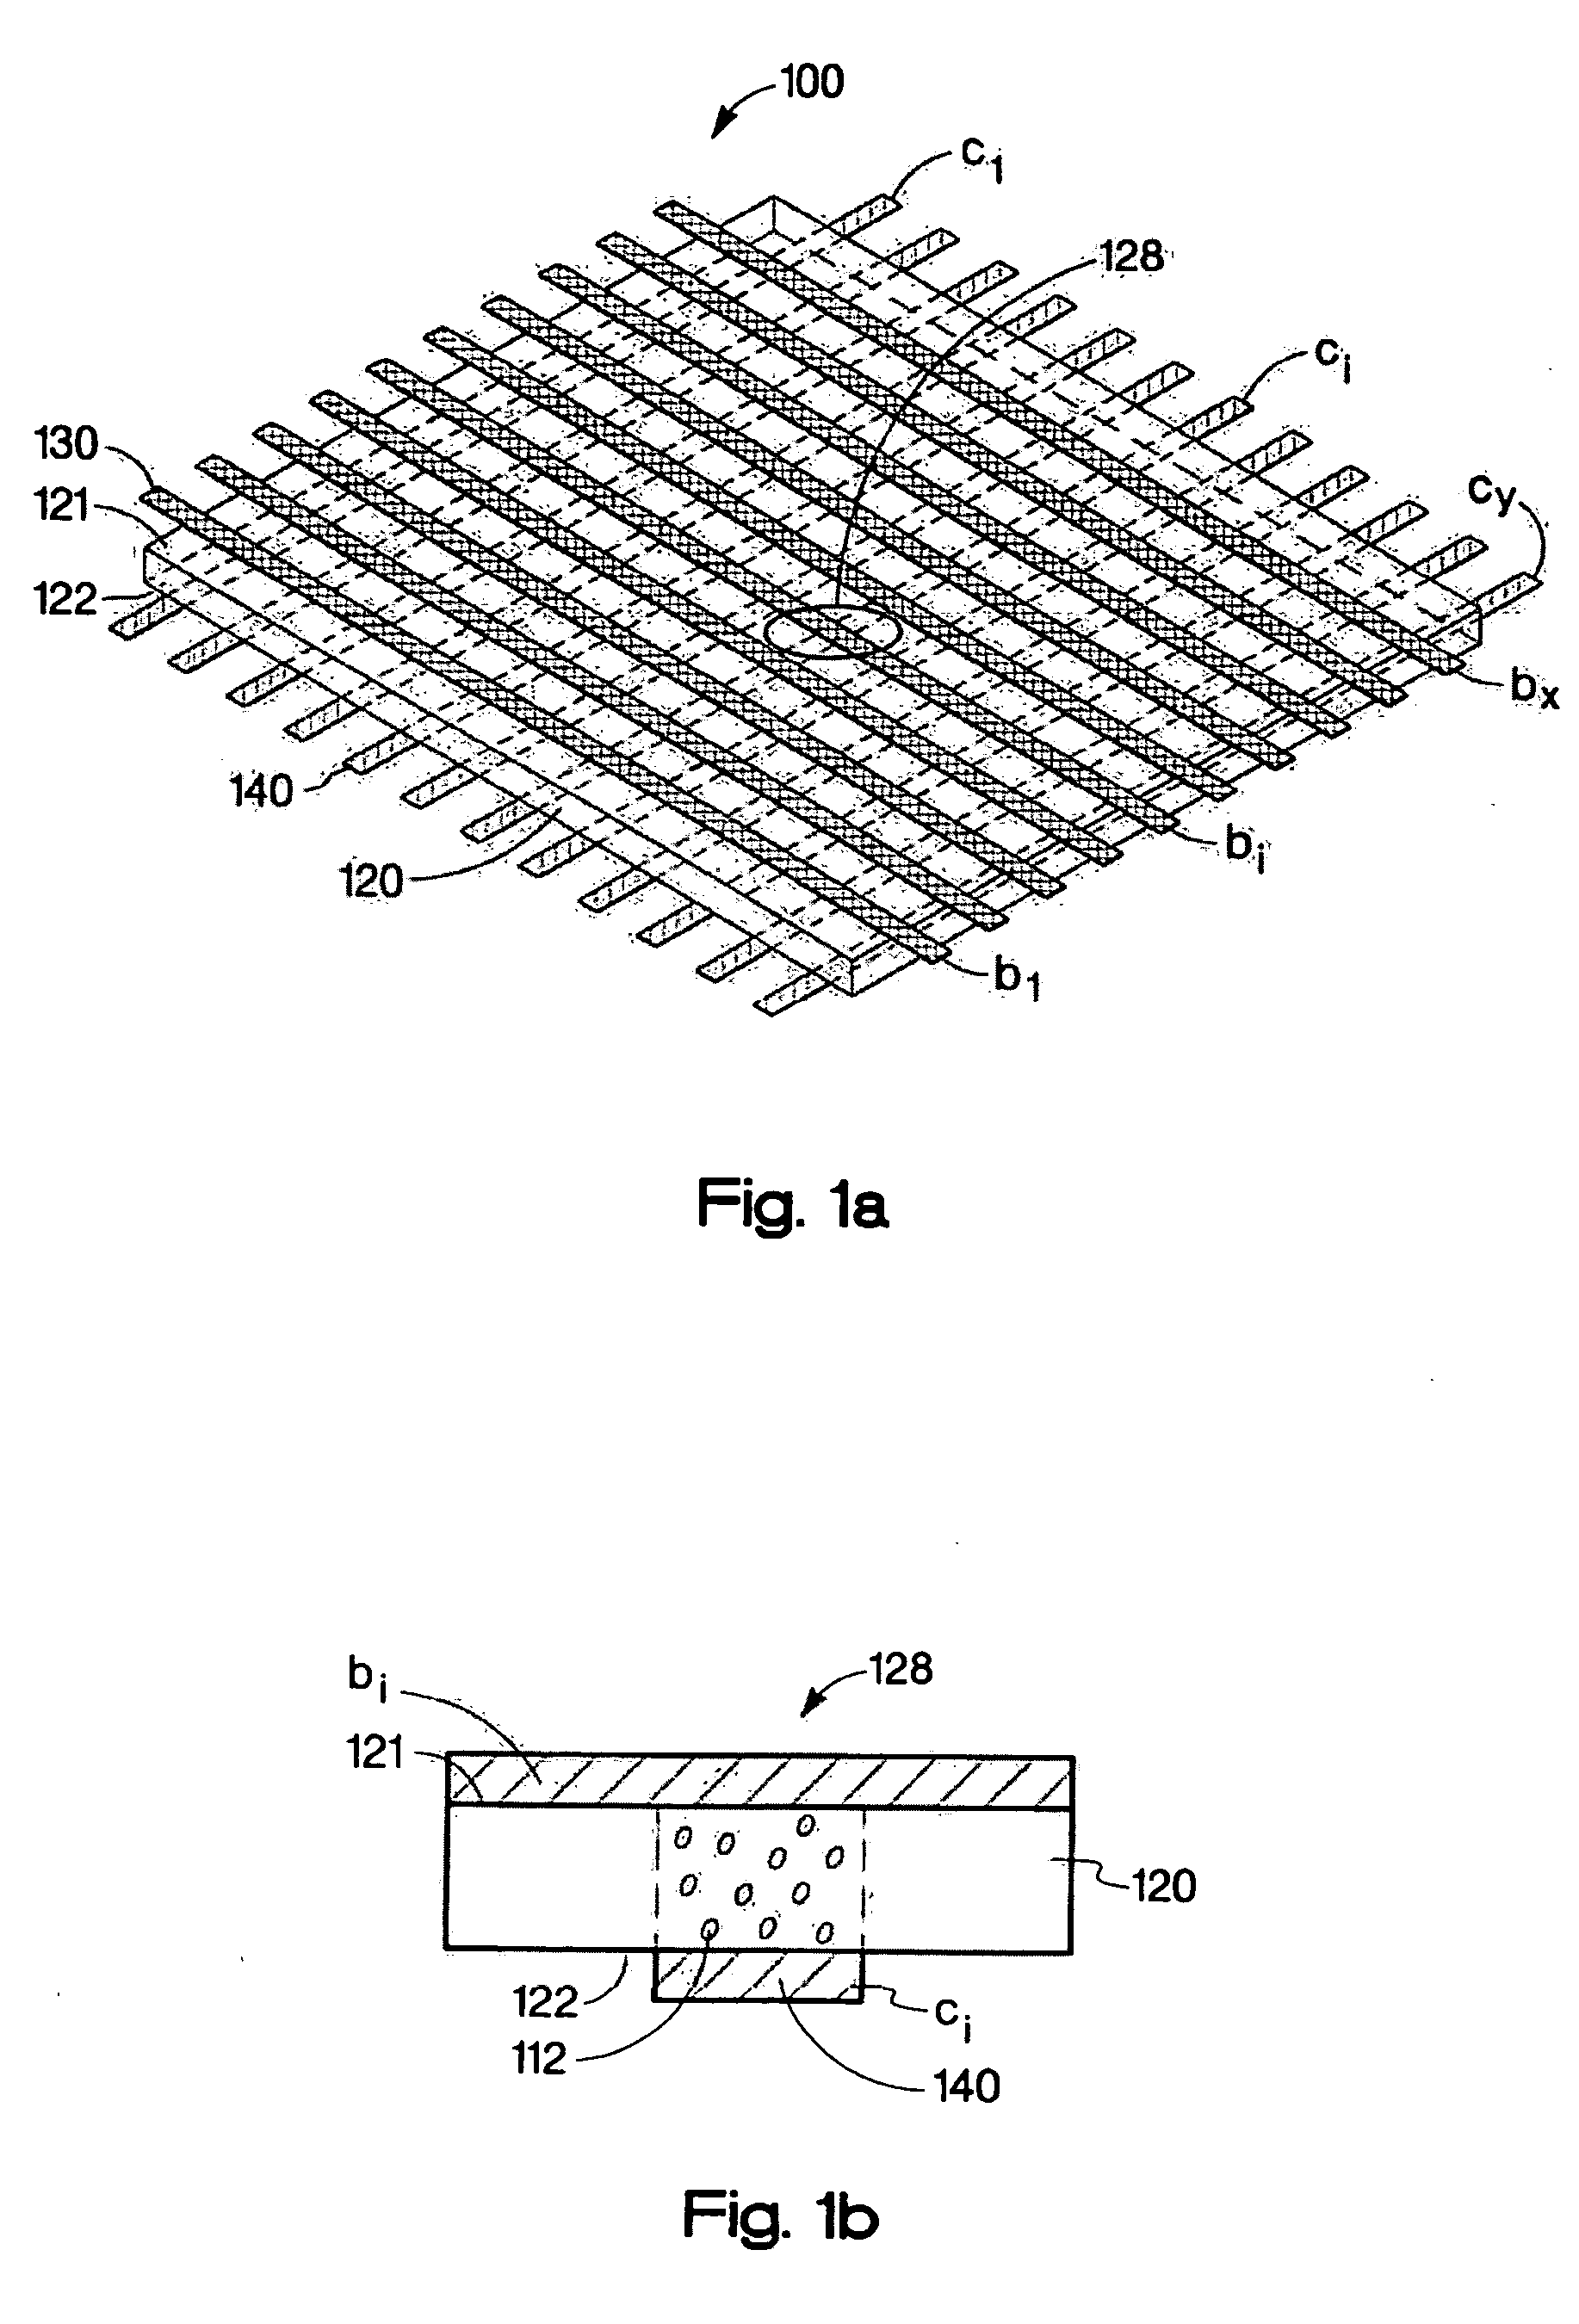 Memory device having a semiconducting polymer film